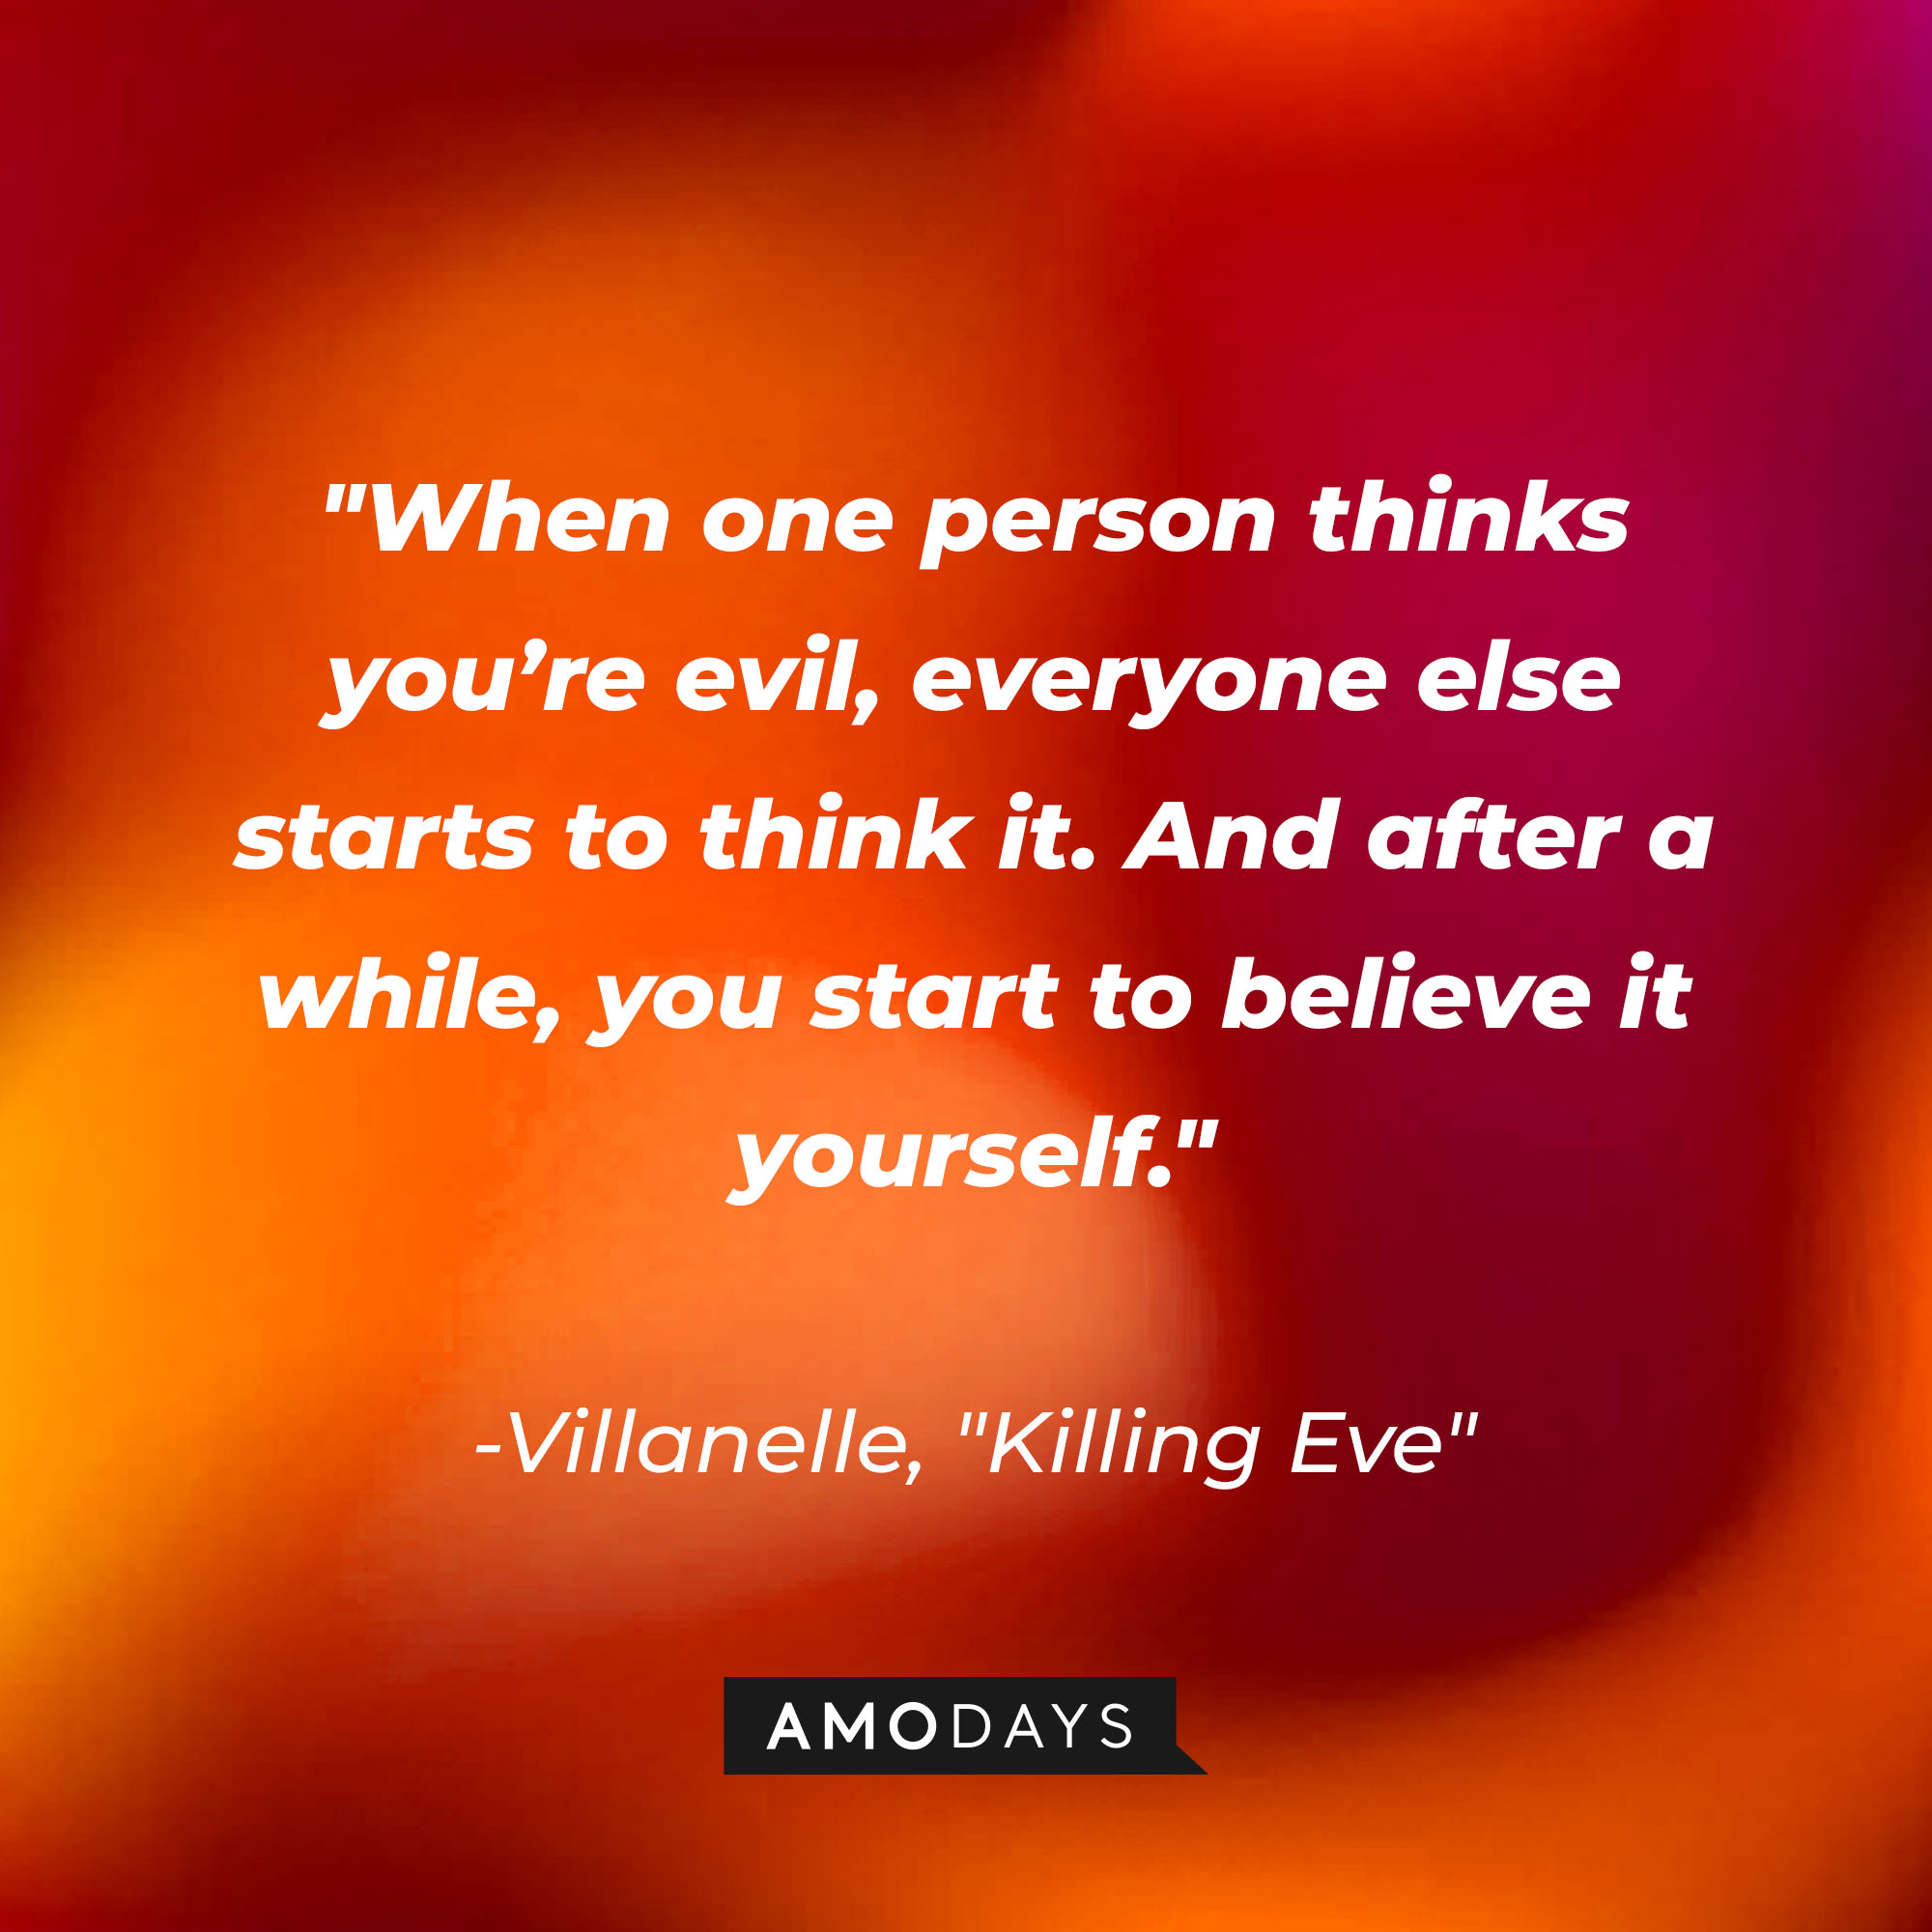 Villanelle's quote: "When one person thinks you’re evil, everyone else starts to think it. And after a while, you start to believe it yourself." | Source: Amodays